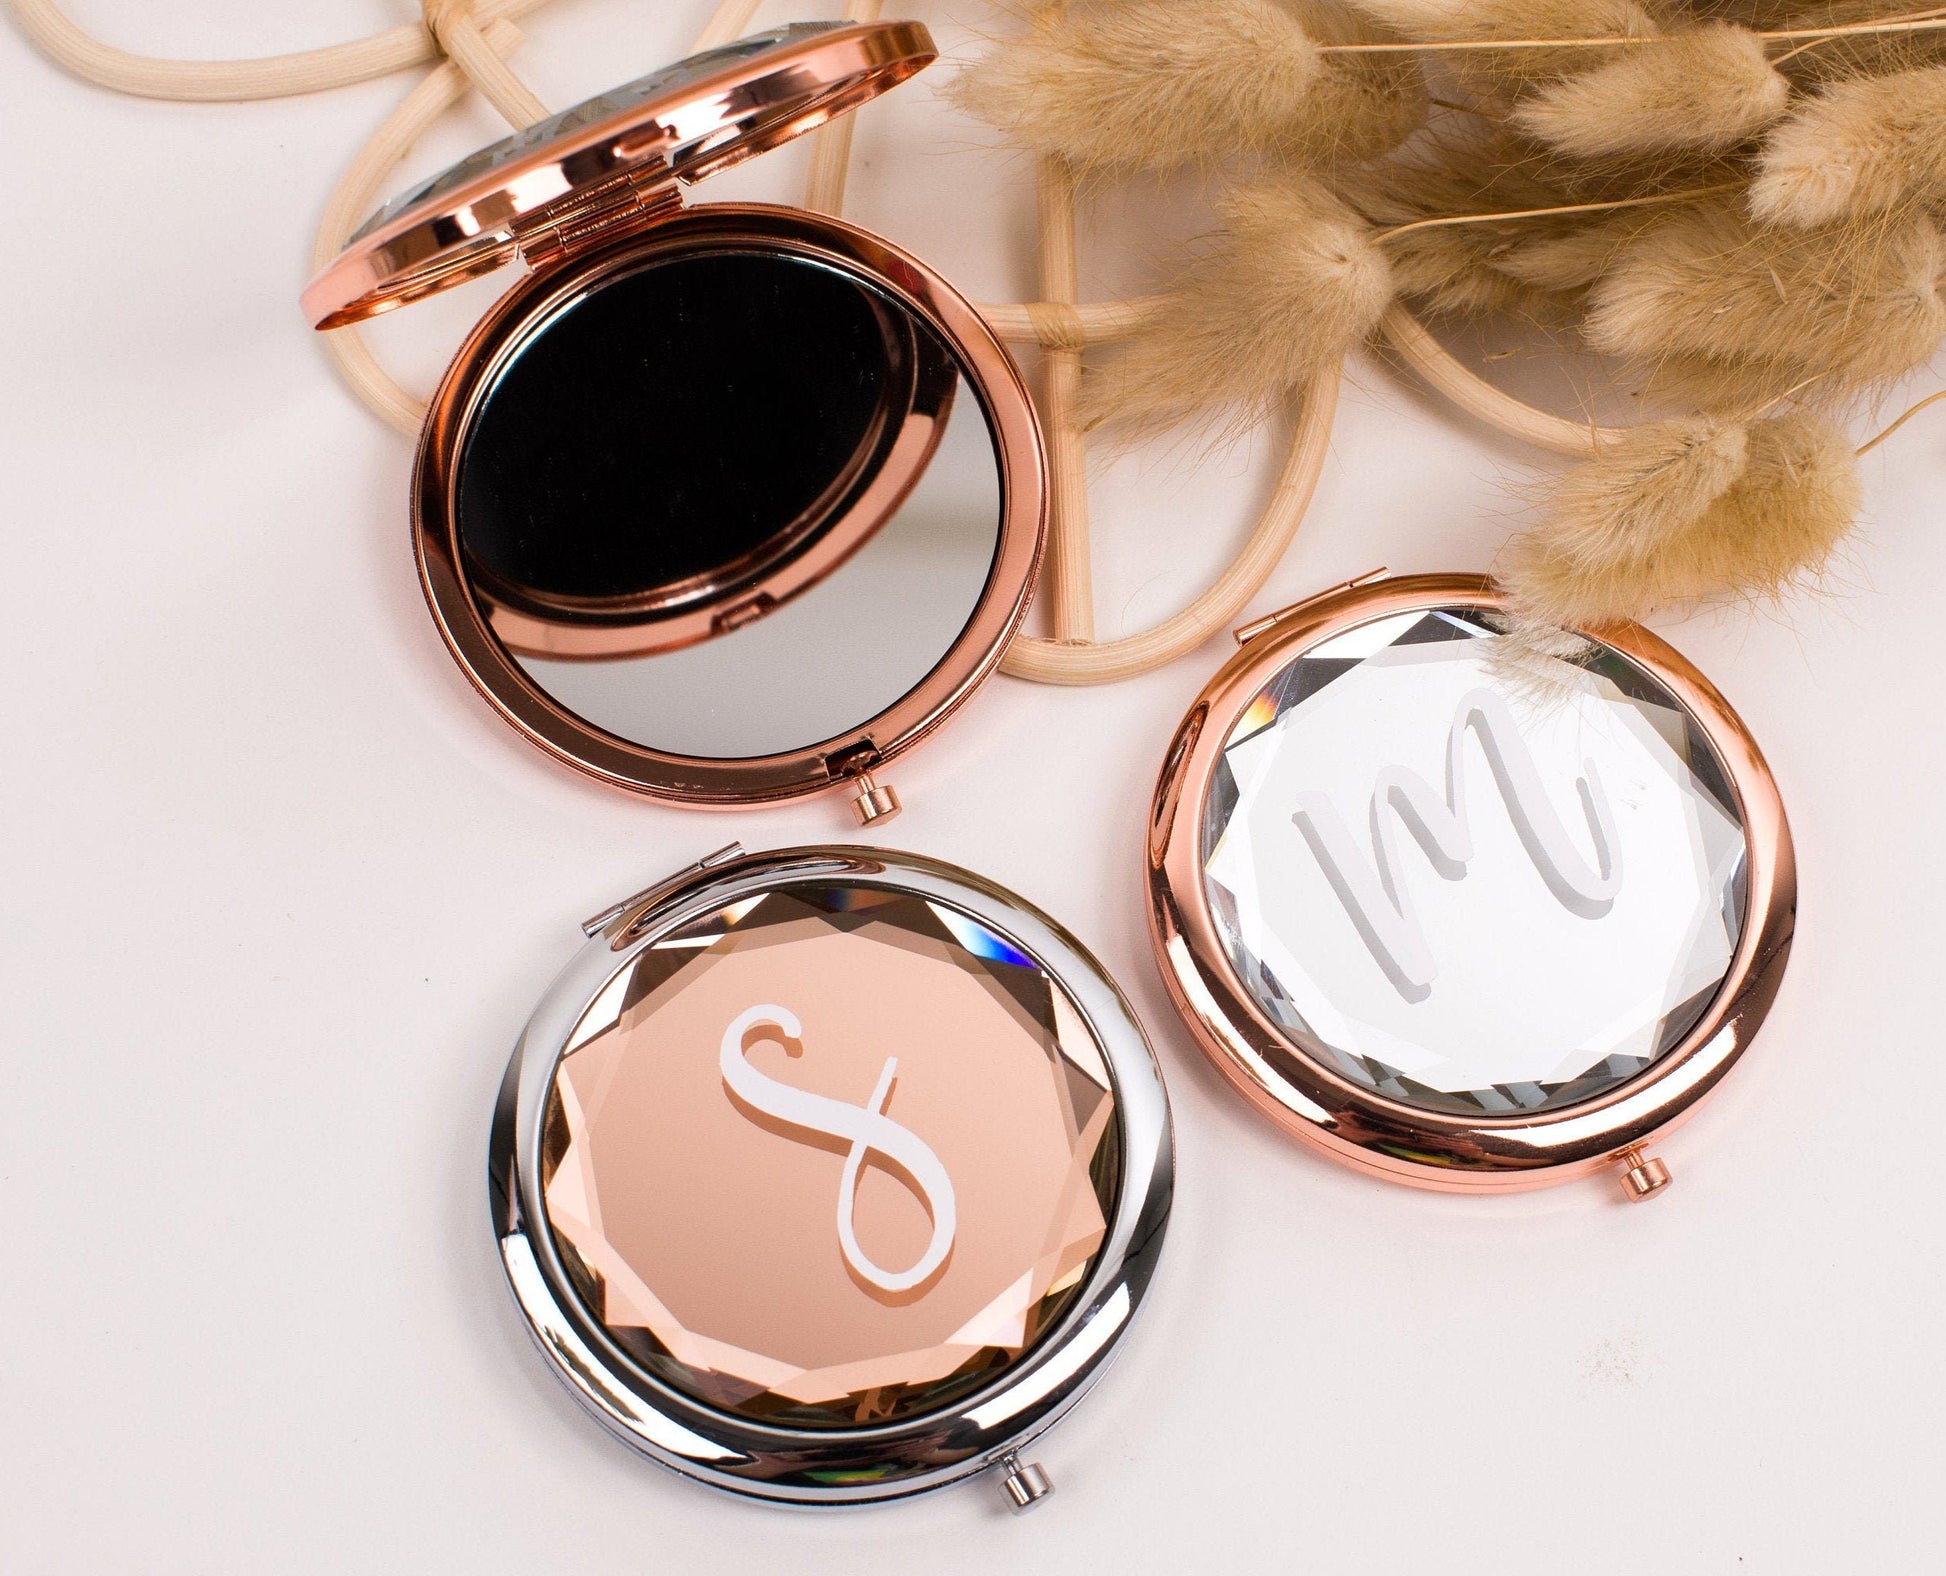 Bachelorette Party Favors - Bachelorette Party Gifts - Bridesmaid Gifts - Mirror Compact Favors - Personalized Gifts for Women